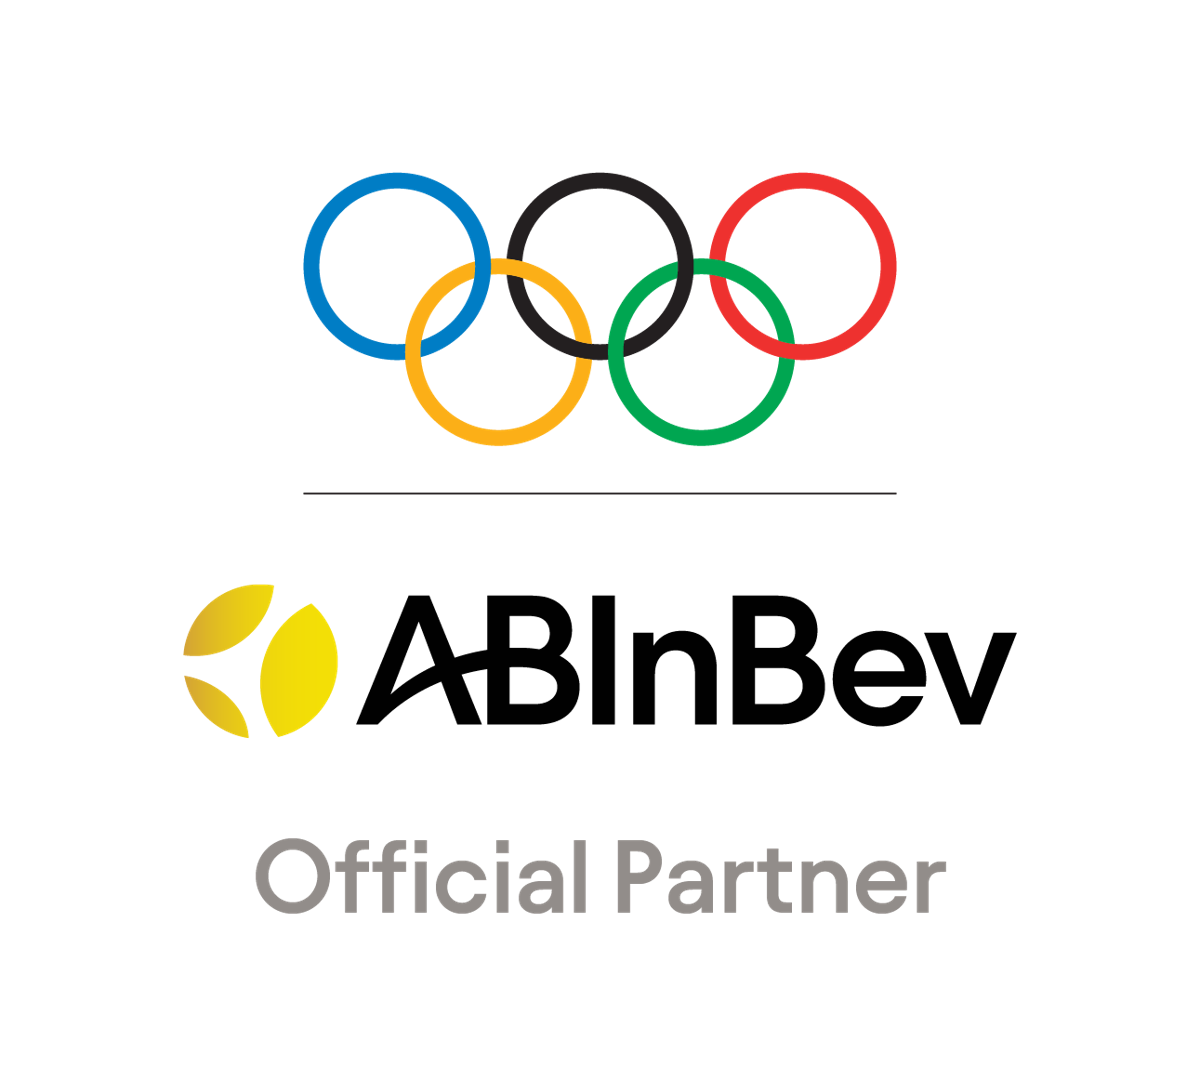 a01 - ABINBEV AND OLYMPIC RINGS (Full Color) - Official Prtner_B